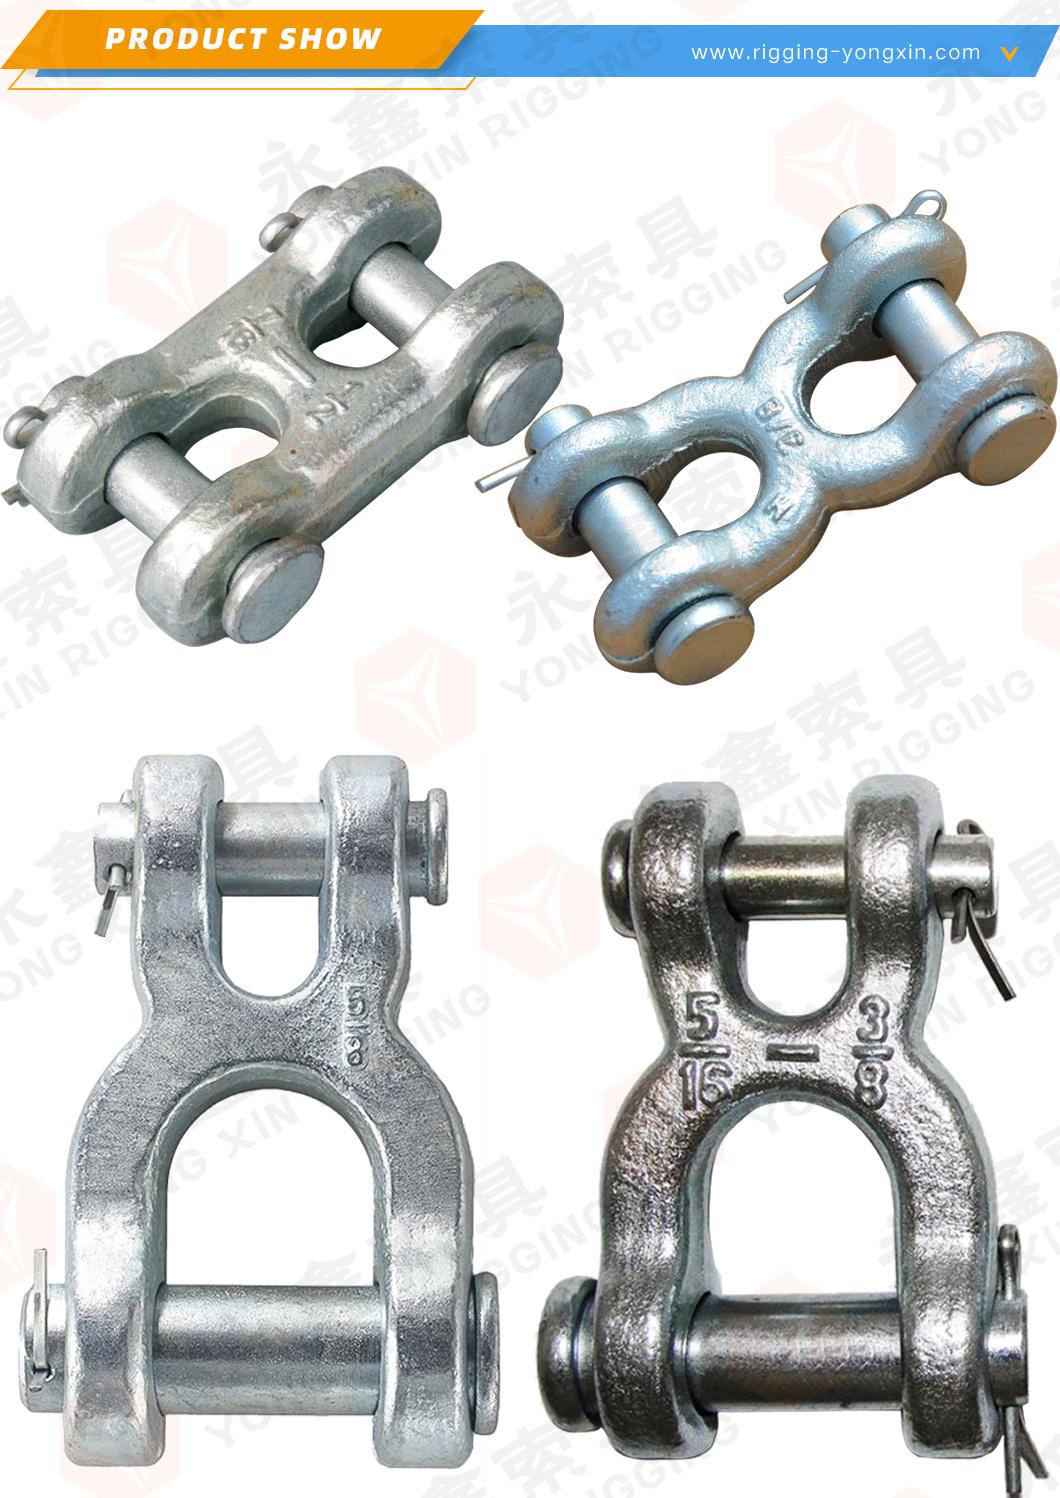 New Arrival Forged Chain Fitting H-Type Connecting Double Twin Clevis Links S Rigging Hardware